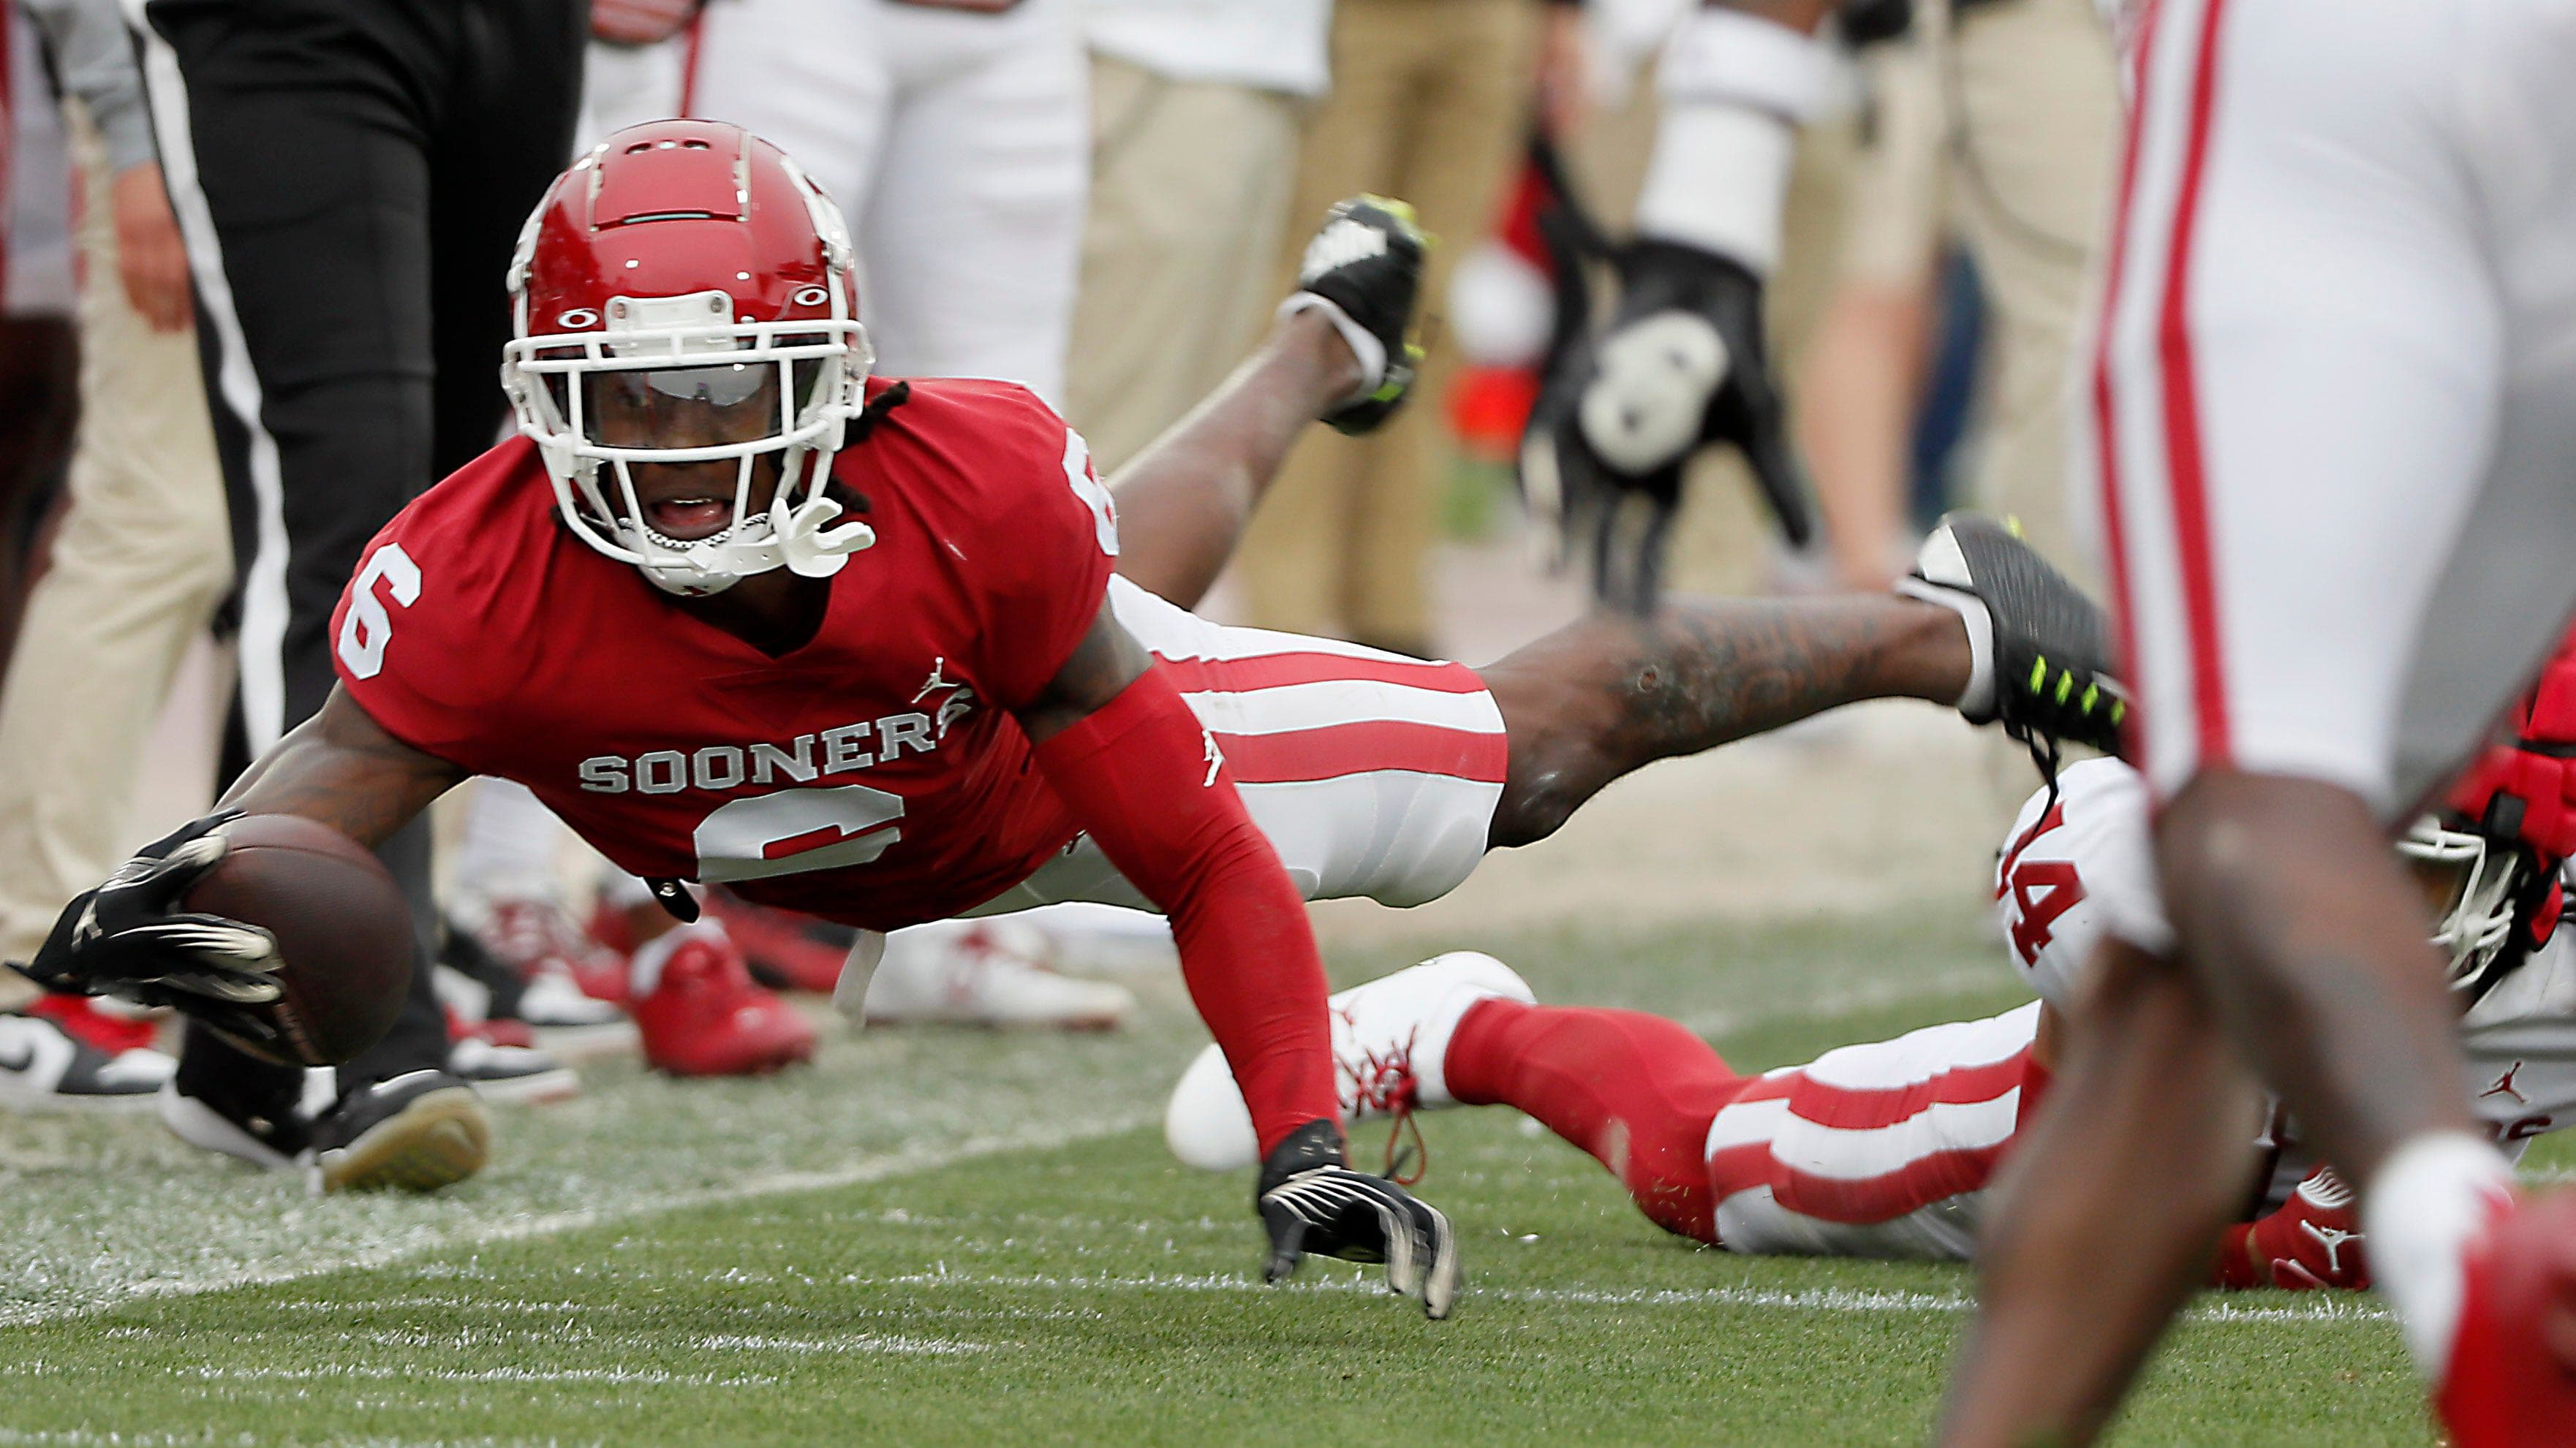 How Deion Burks' Elite Speed Changes the Dynamic for Oklahoma's Receivers